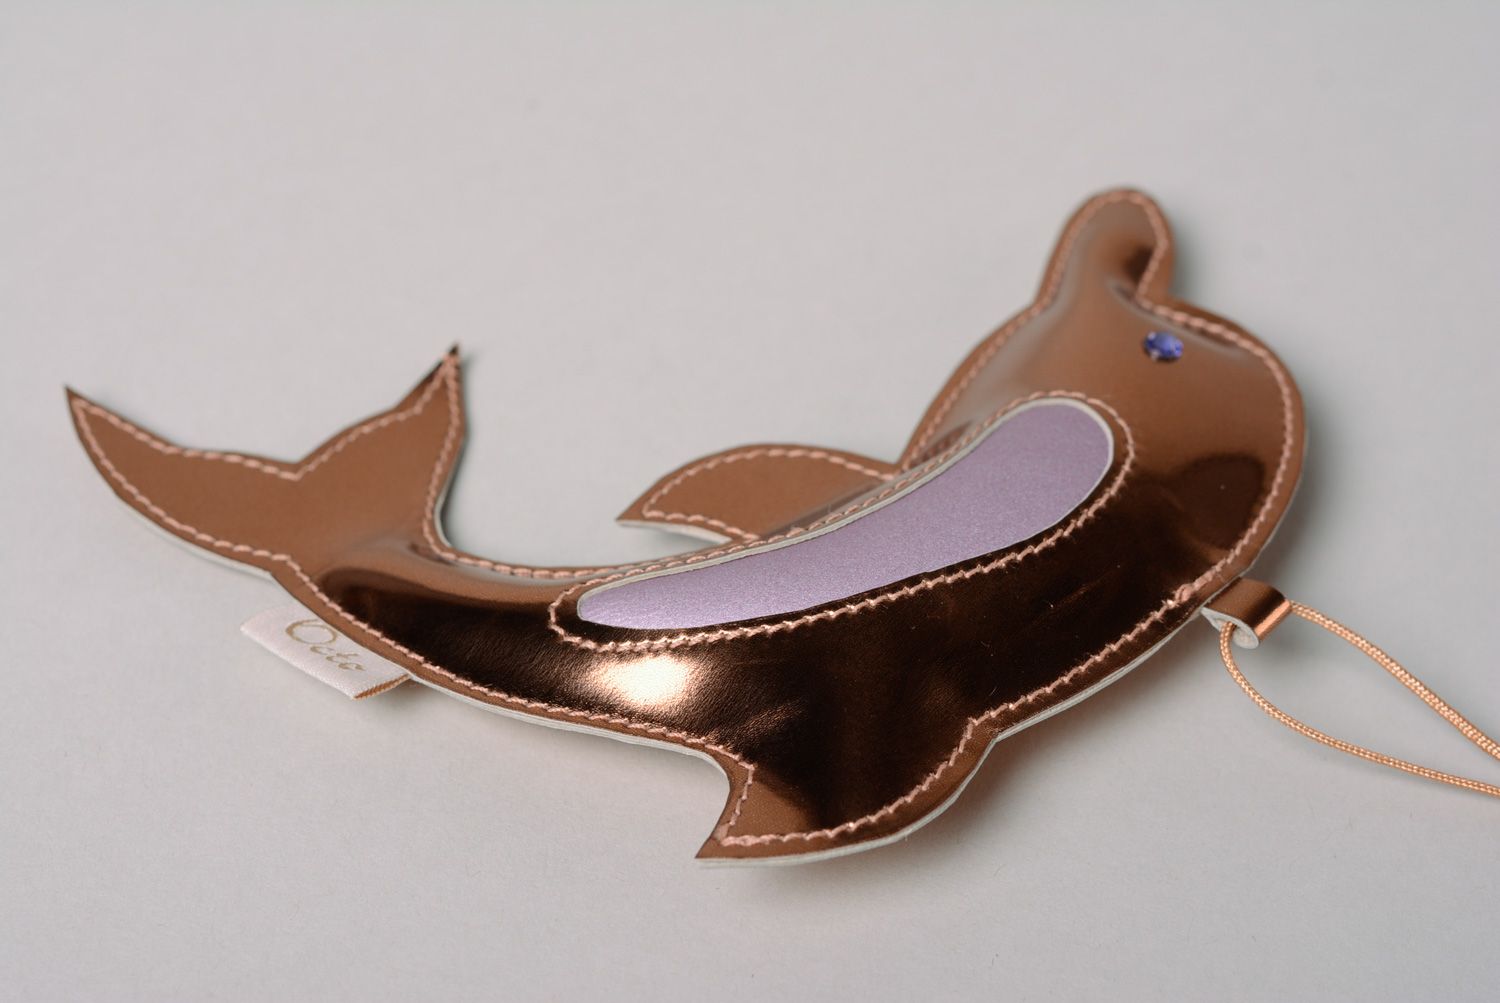 Handmade leather bag charm in the shape of dolphin keychain photo 4